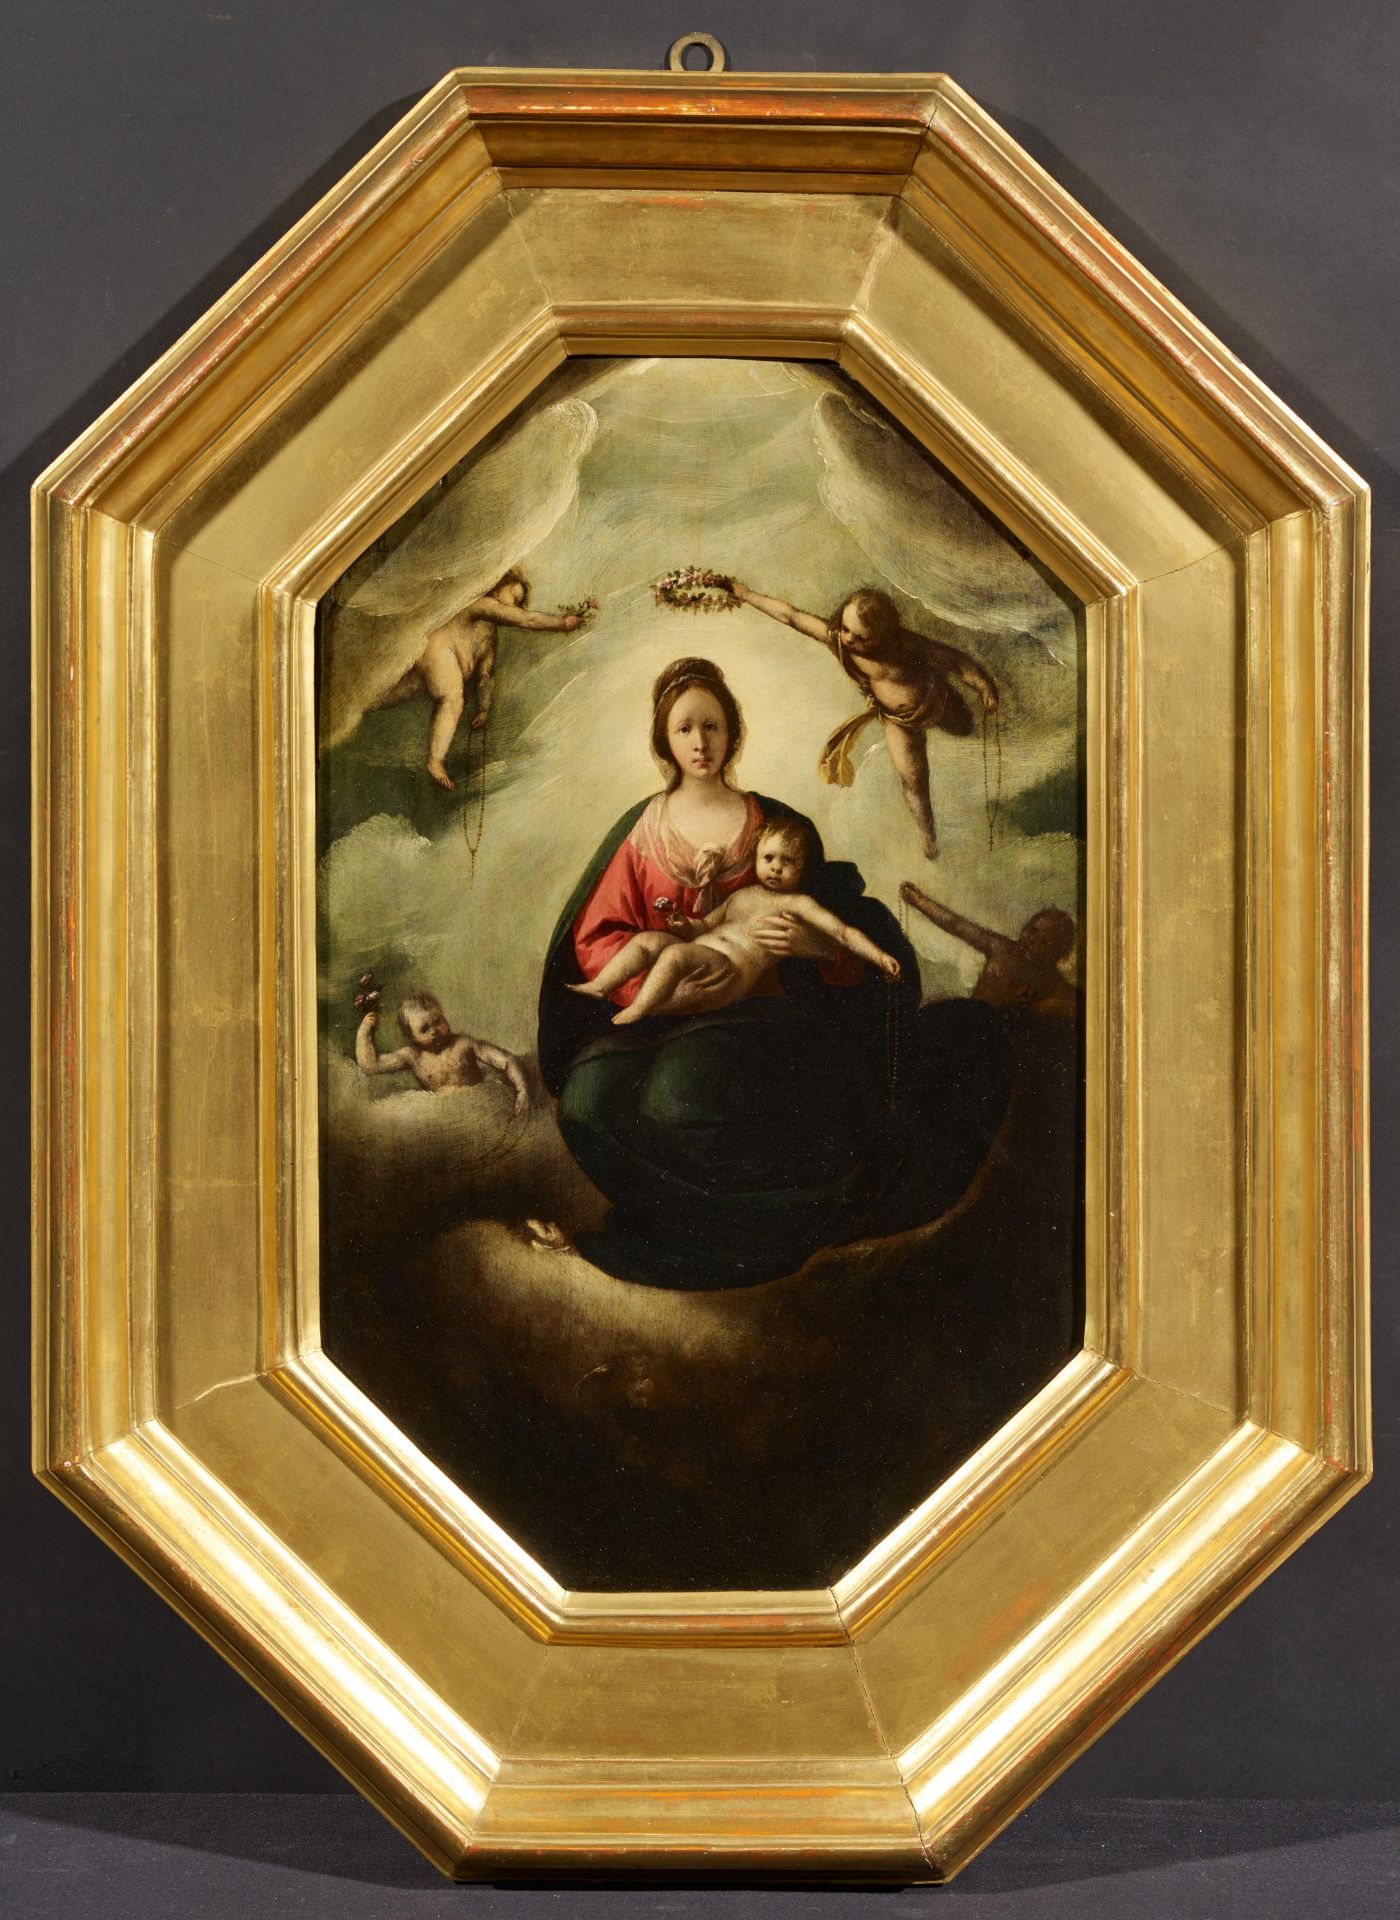 Giovanni Stefano Danedi: Madonna with Child and Angels - Image 2 of 4